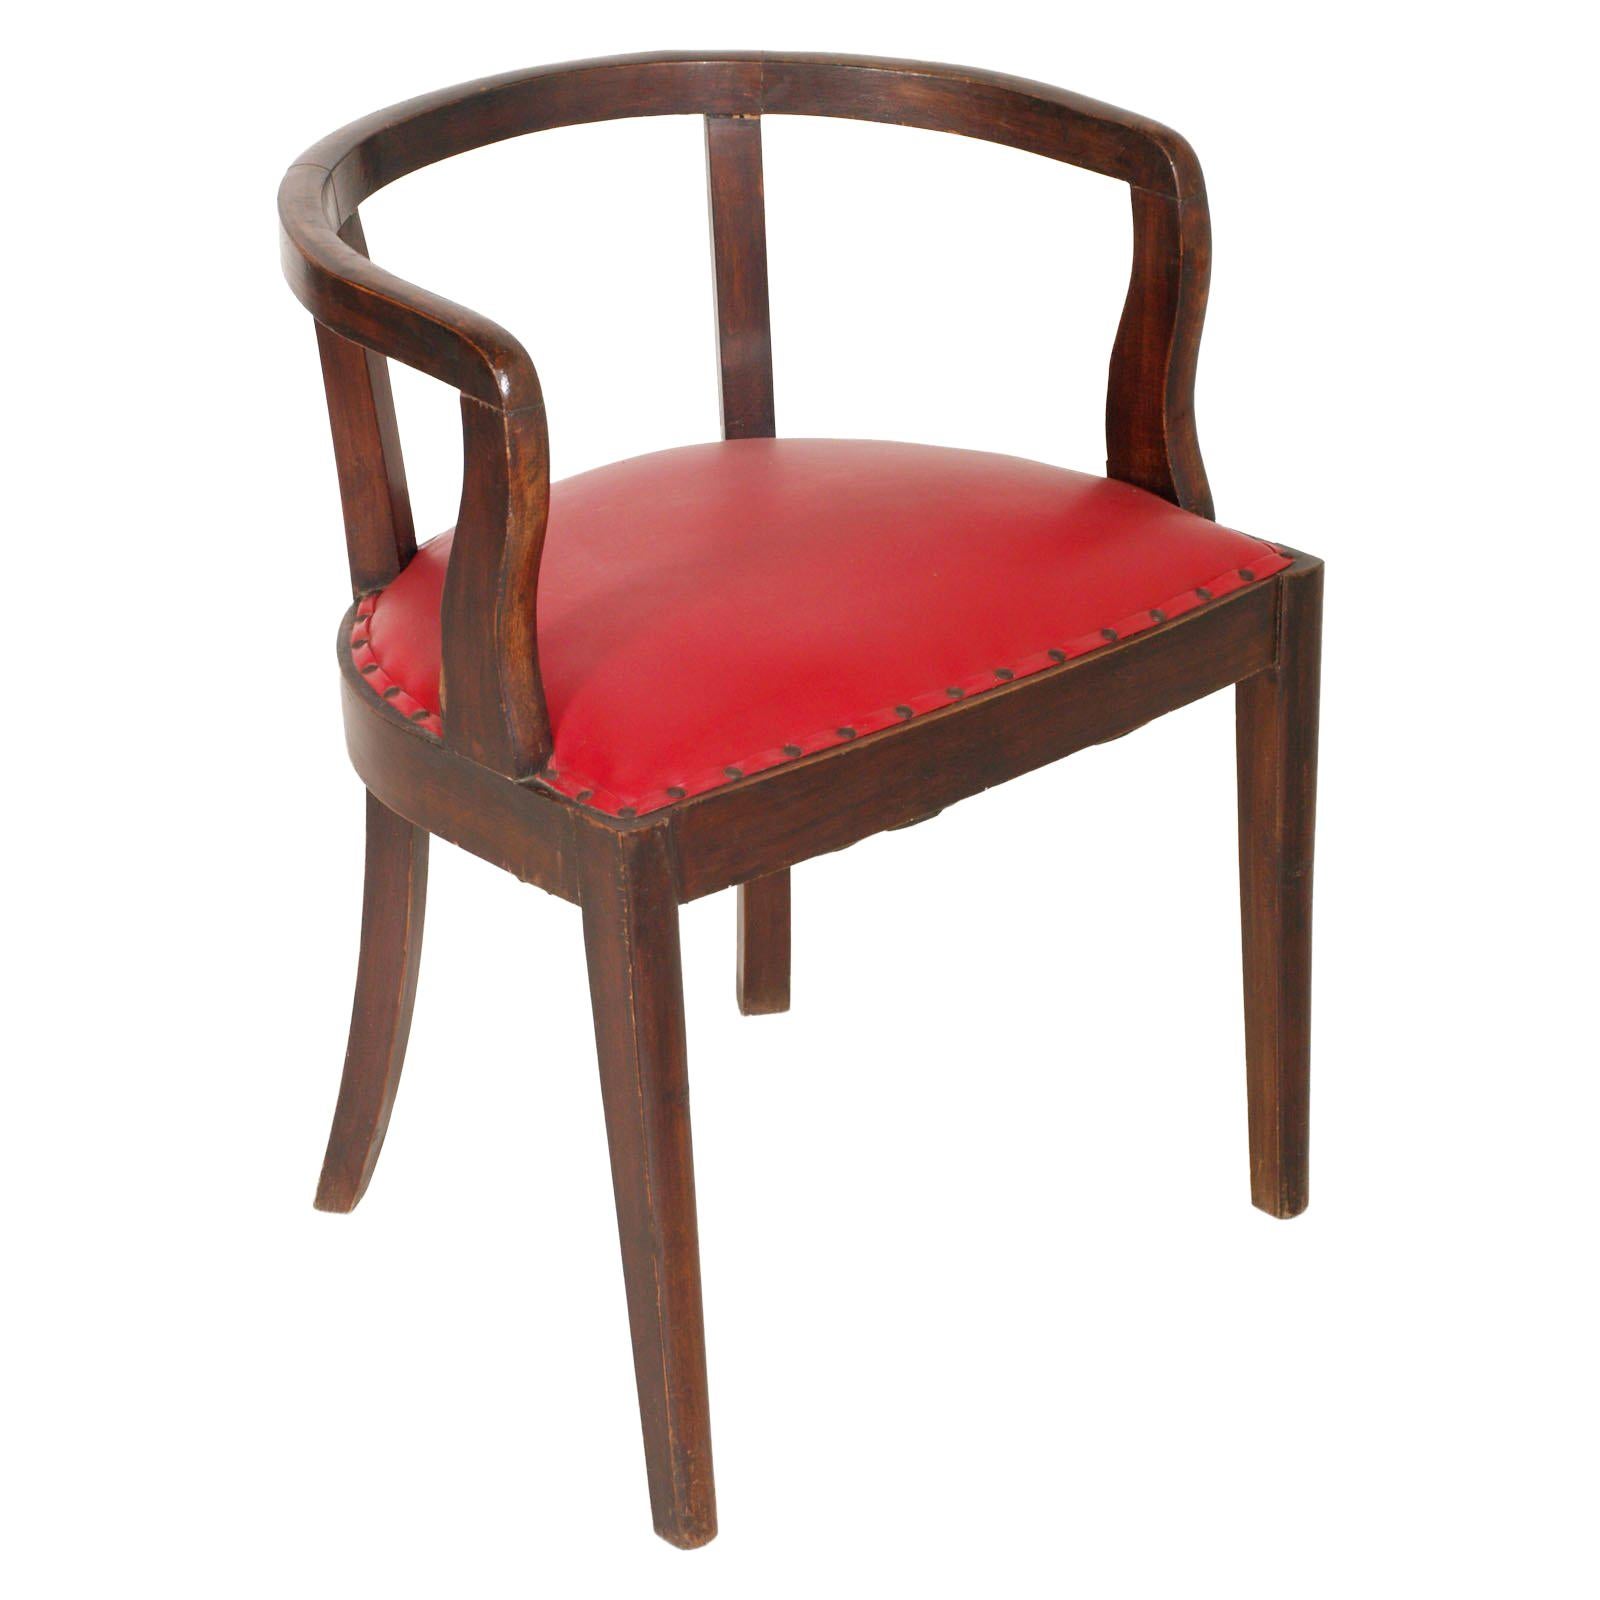 French 1920s Art Deco Armchair in Brown Walnut, Red Skin Color Jules Leleu Style